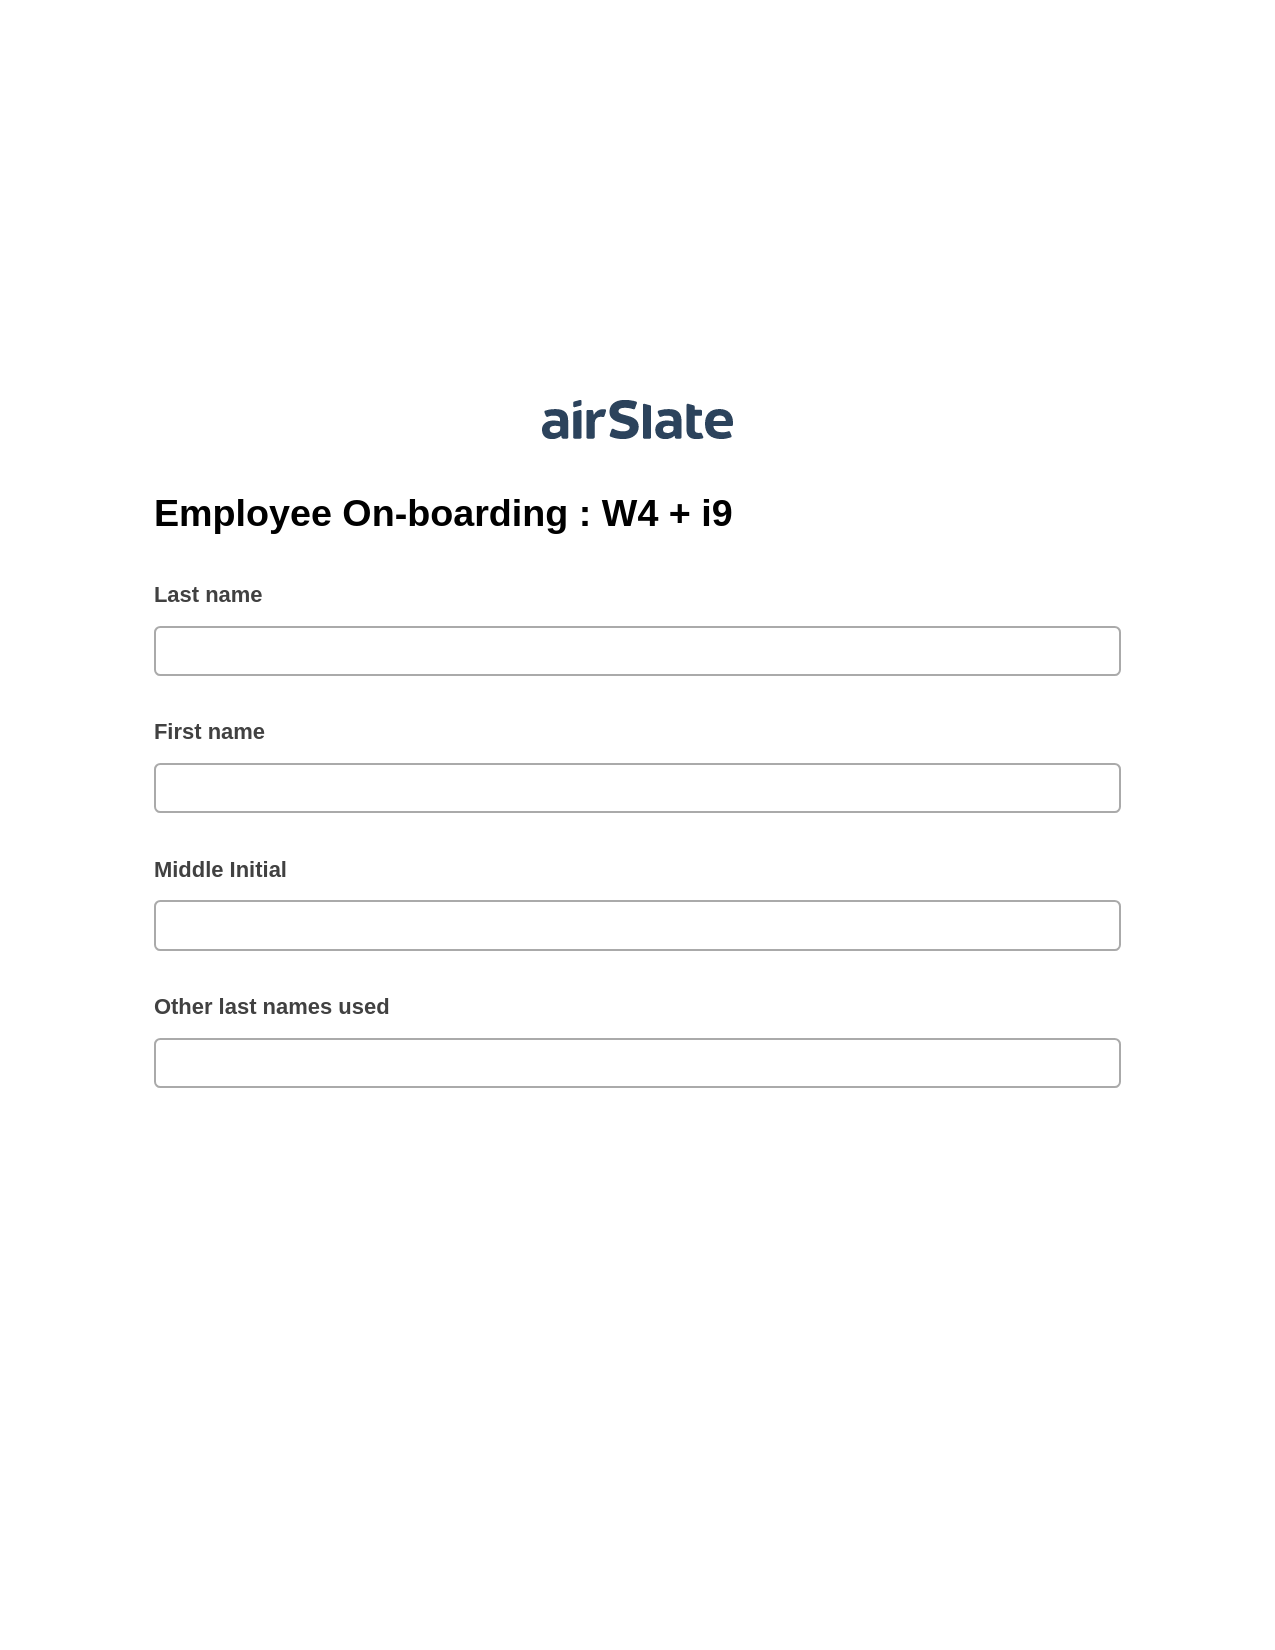 Employee On-boarding : W4 + i9 Pre-fill Dropdowns from Excel Bot, Set Signature Type Bot, Export to Salesforce Bot